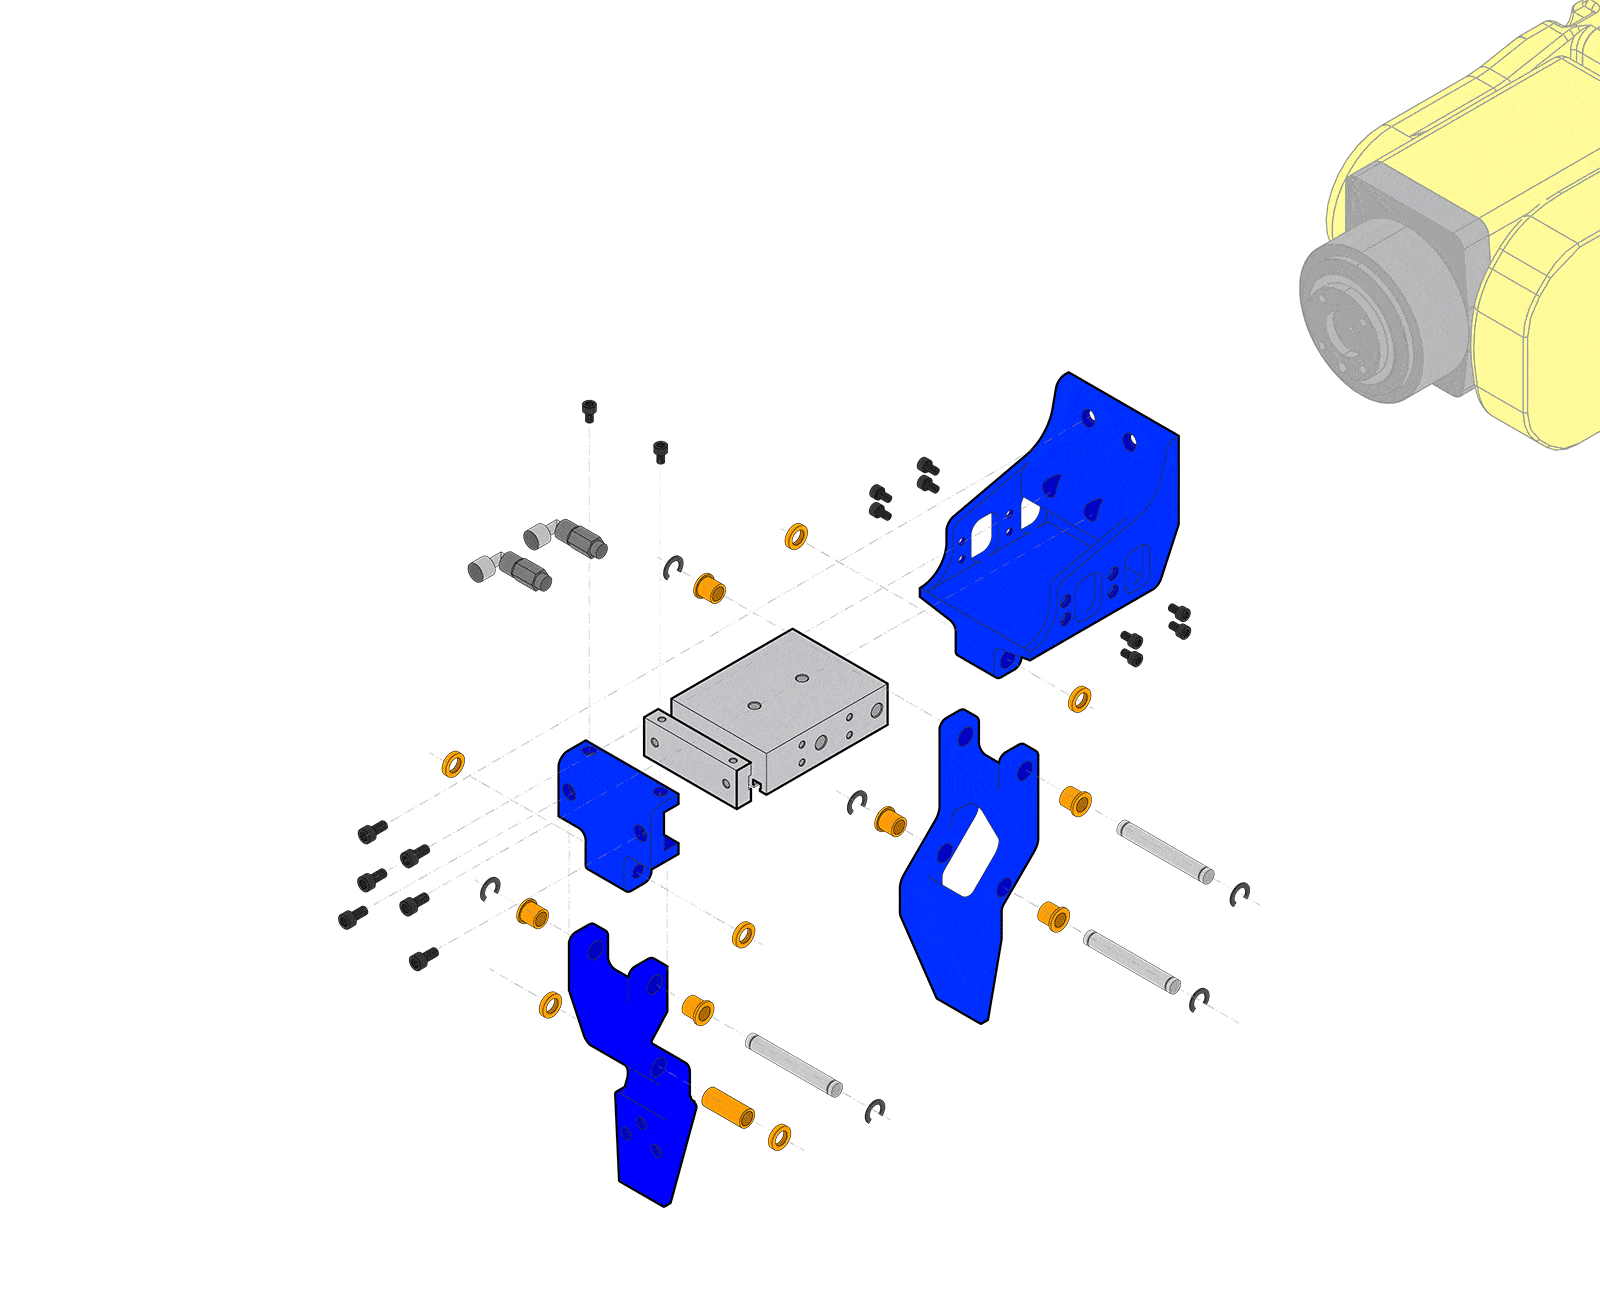 Gripper assembly sequence